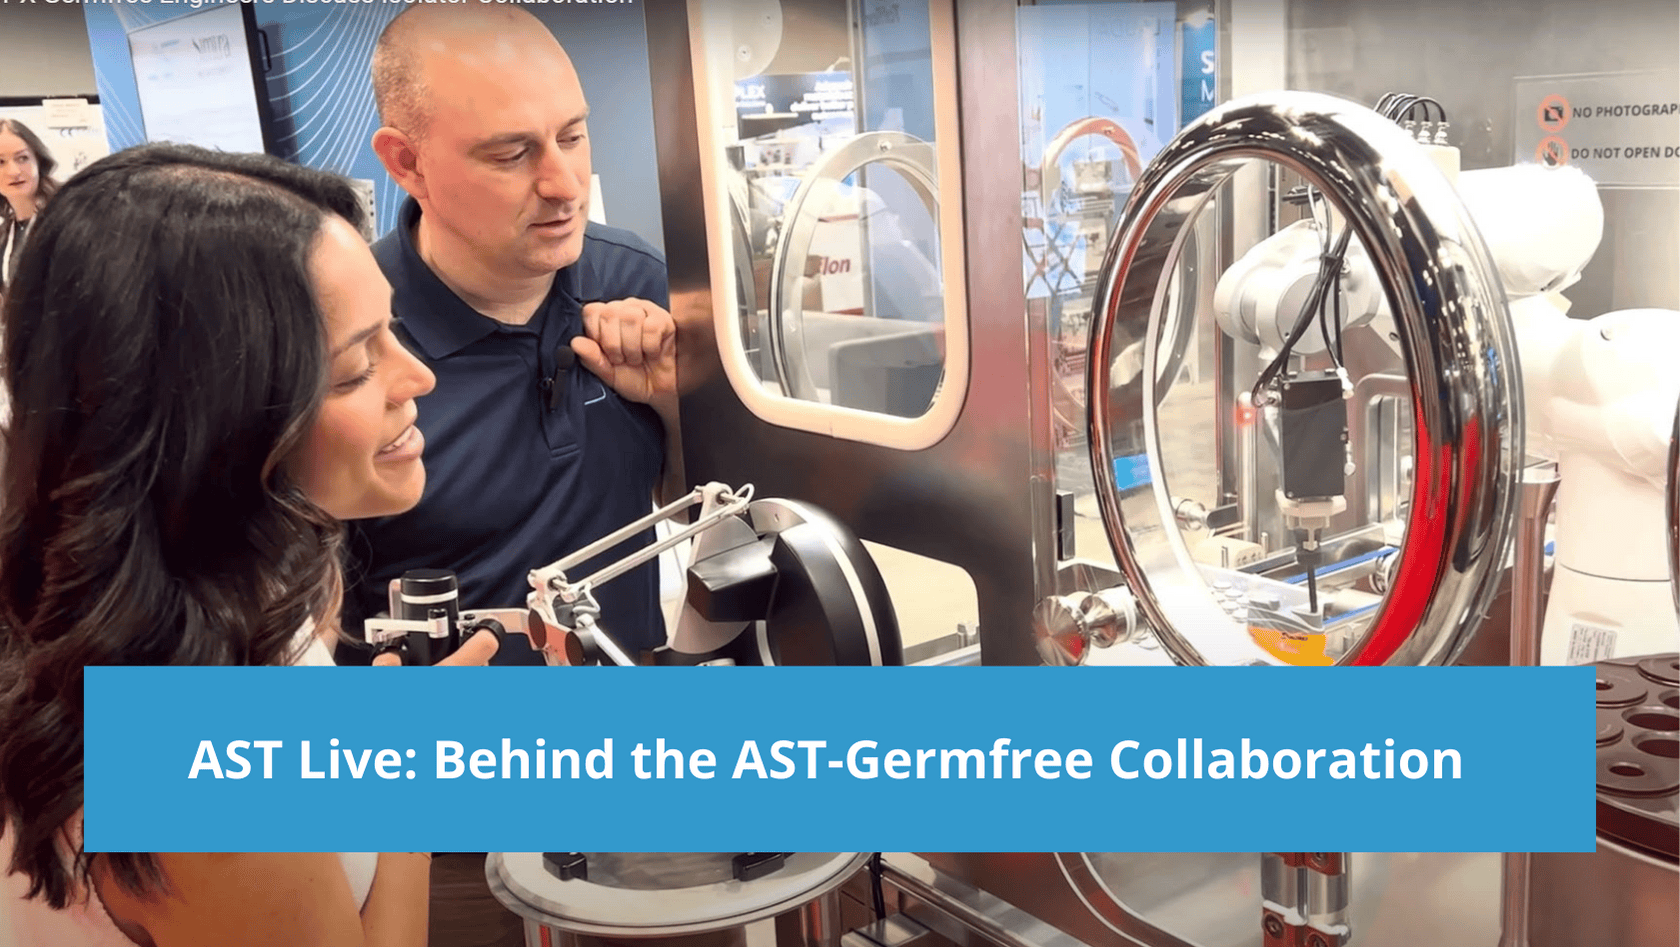 AST Live: The Engineers Behind the AST-Germfree Collaboration  